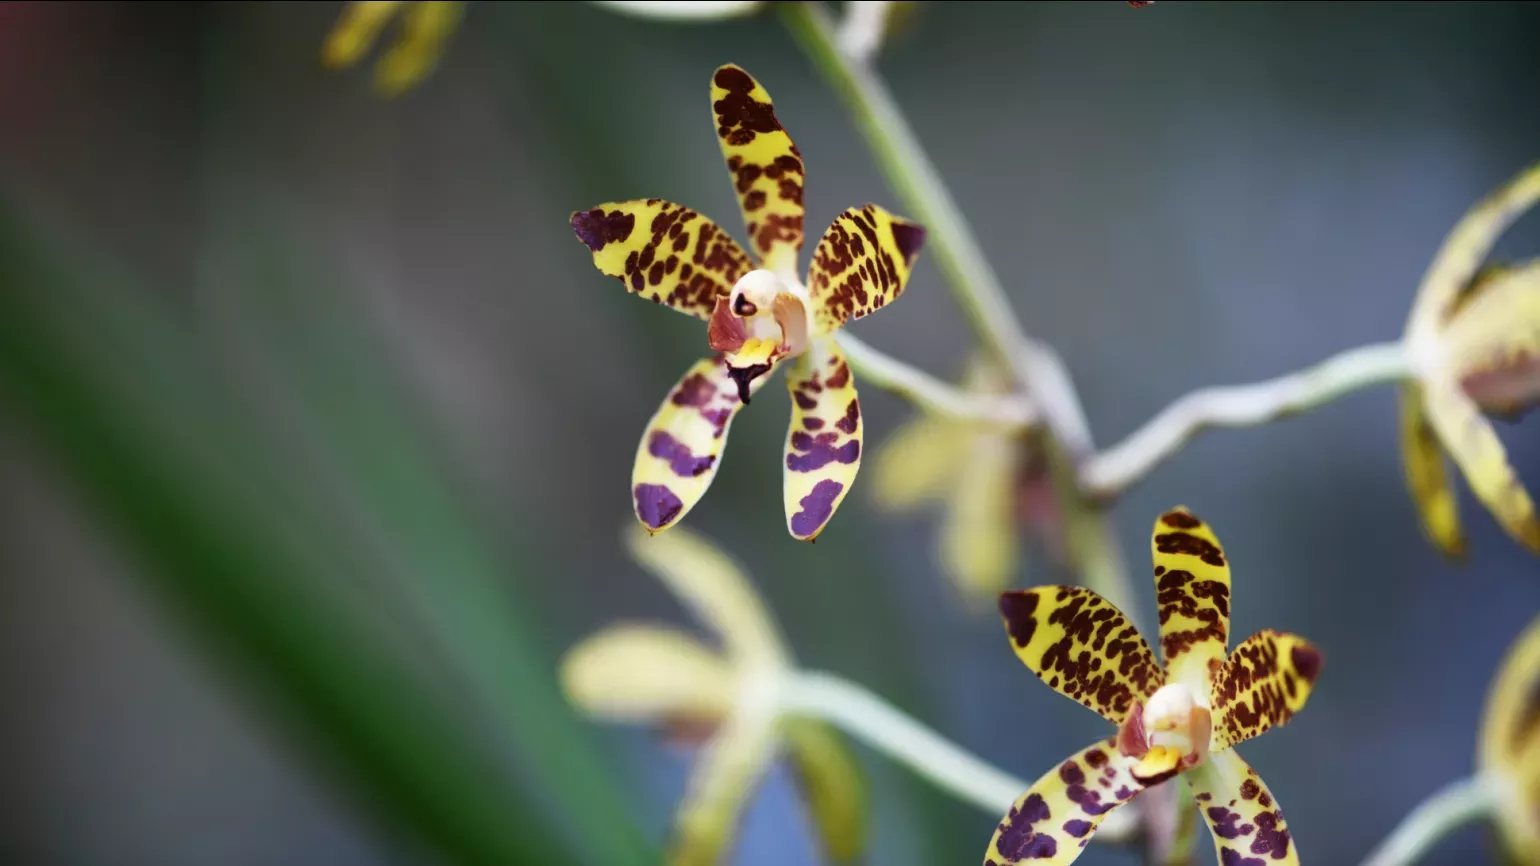 Yellow and brown spotted leopard orchid flowers